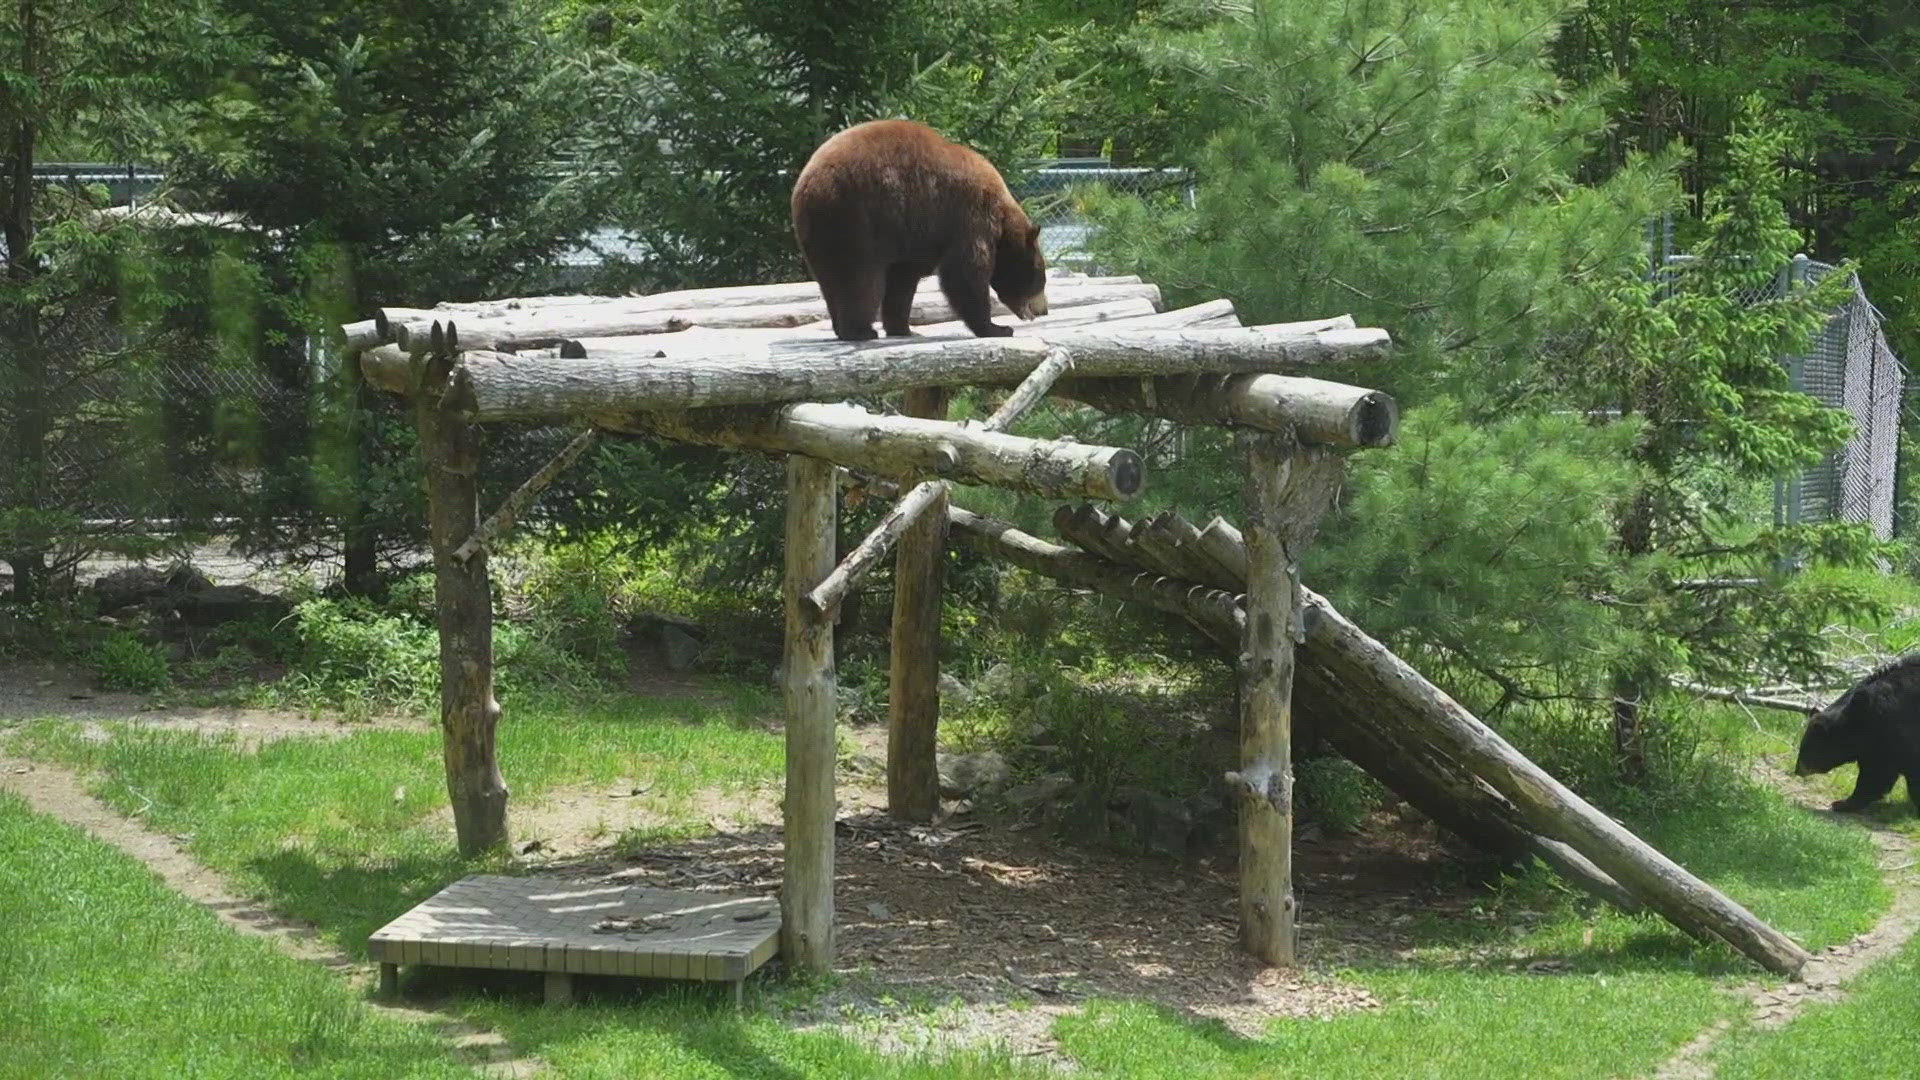 Animals at the park include moose, bears, eagles, deer, bobcats, and turtles. Many were injured, orphaned, or raised illegally by people.